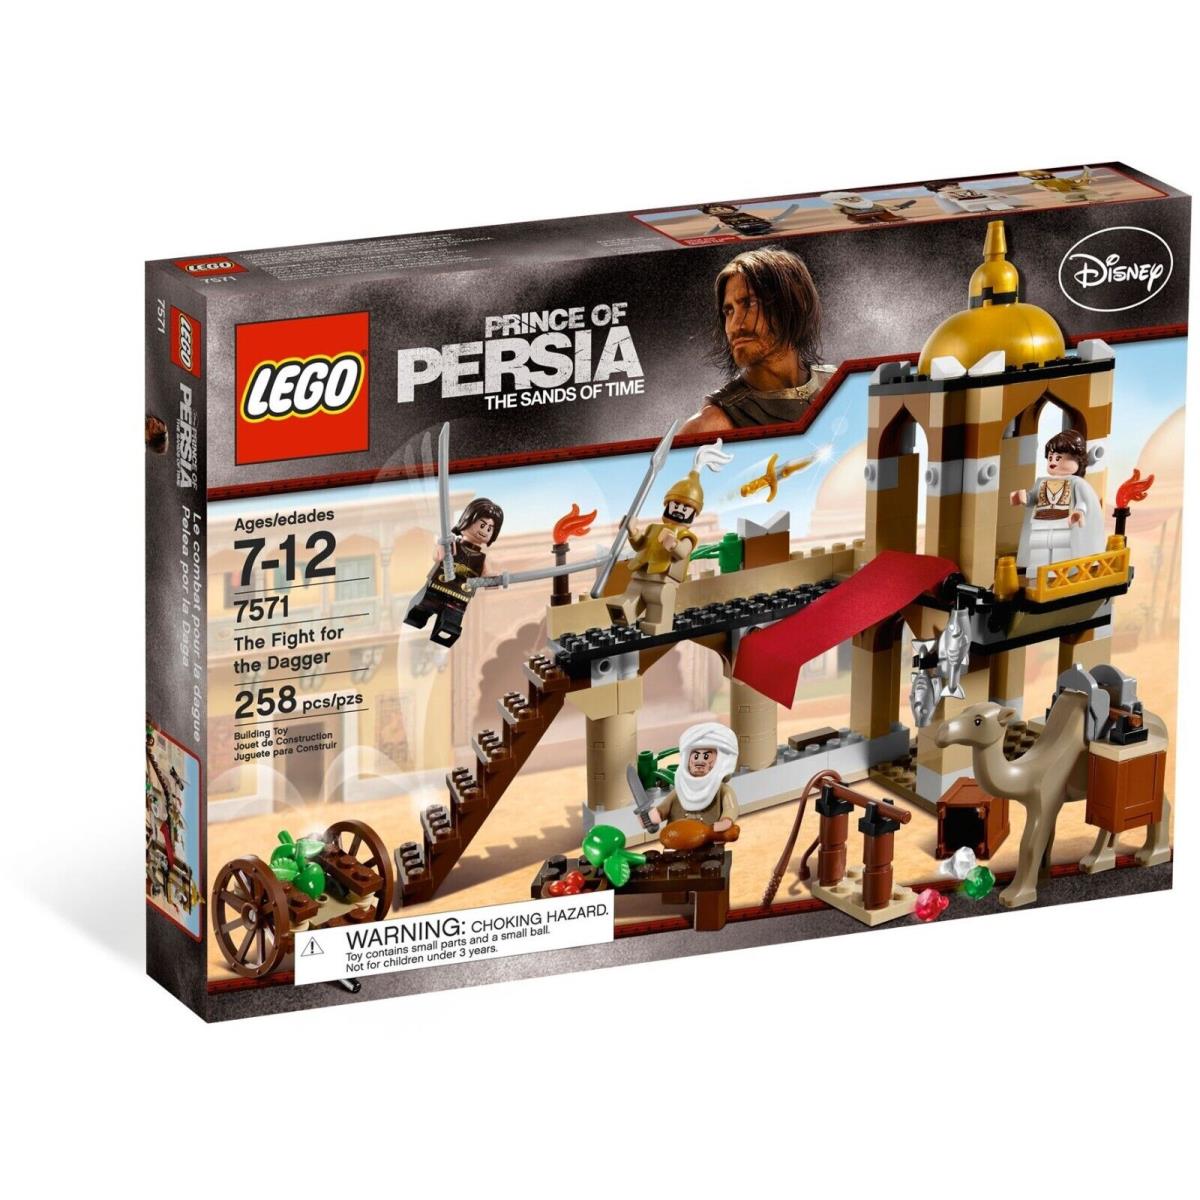 Lego Prince of Persia: The Fight For The Dagger Set 7571